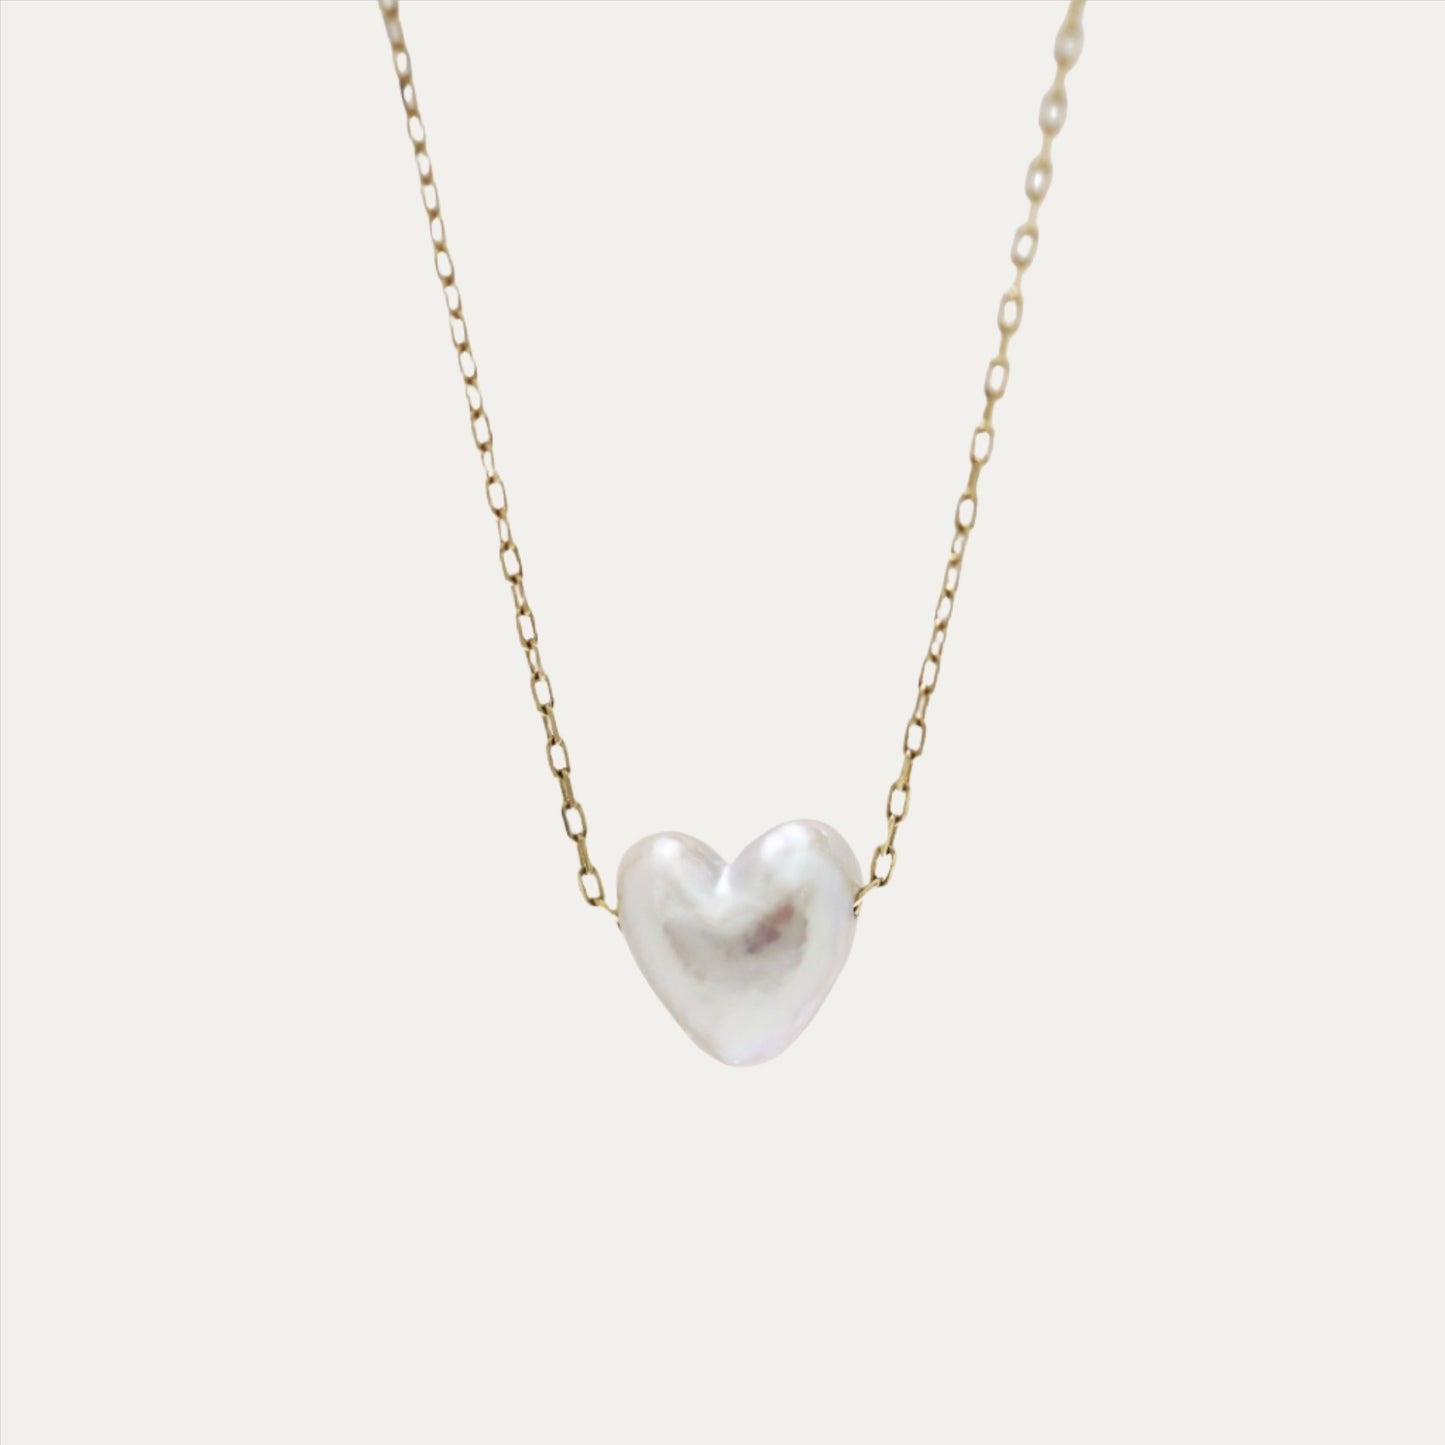 18k Yellow Gold Mini Heart-shaped Akoya Pearl Adjustable Chain Necklace